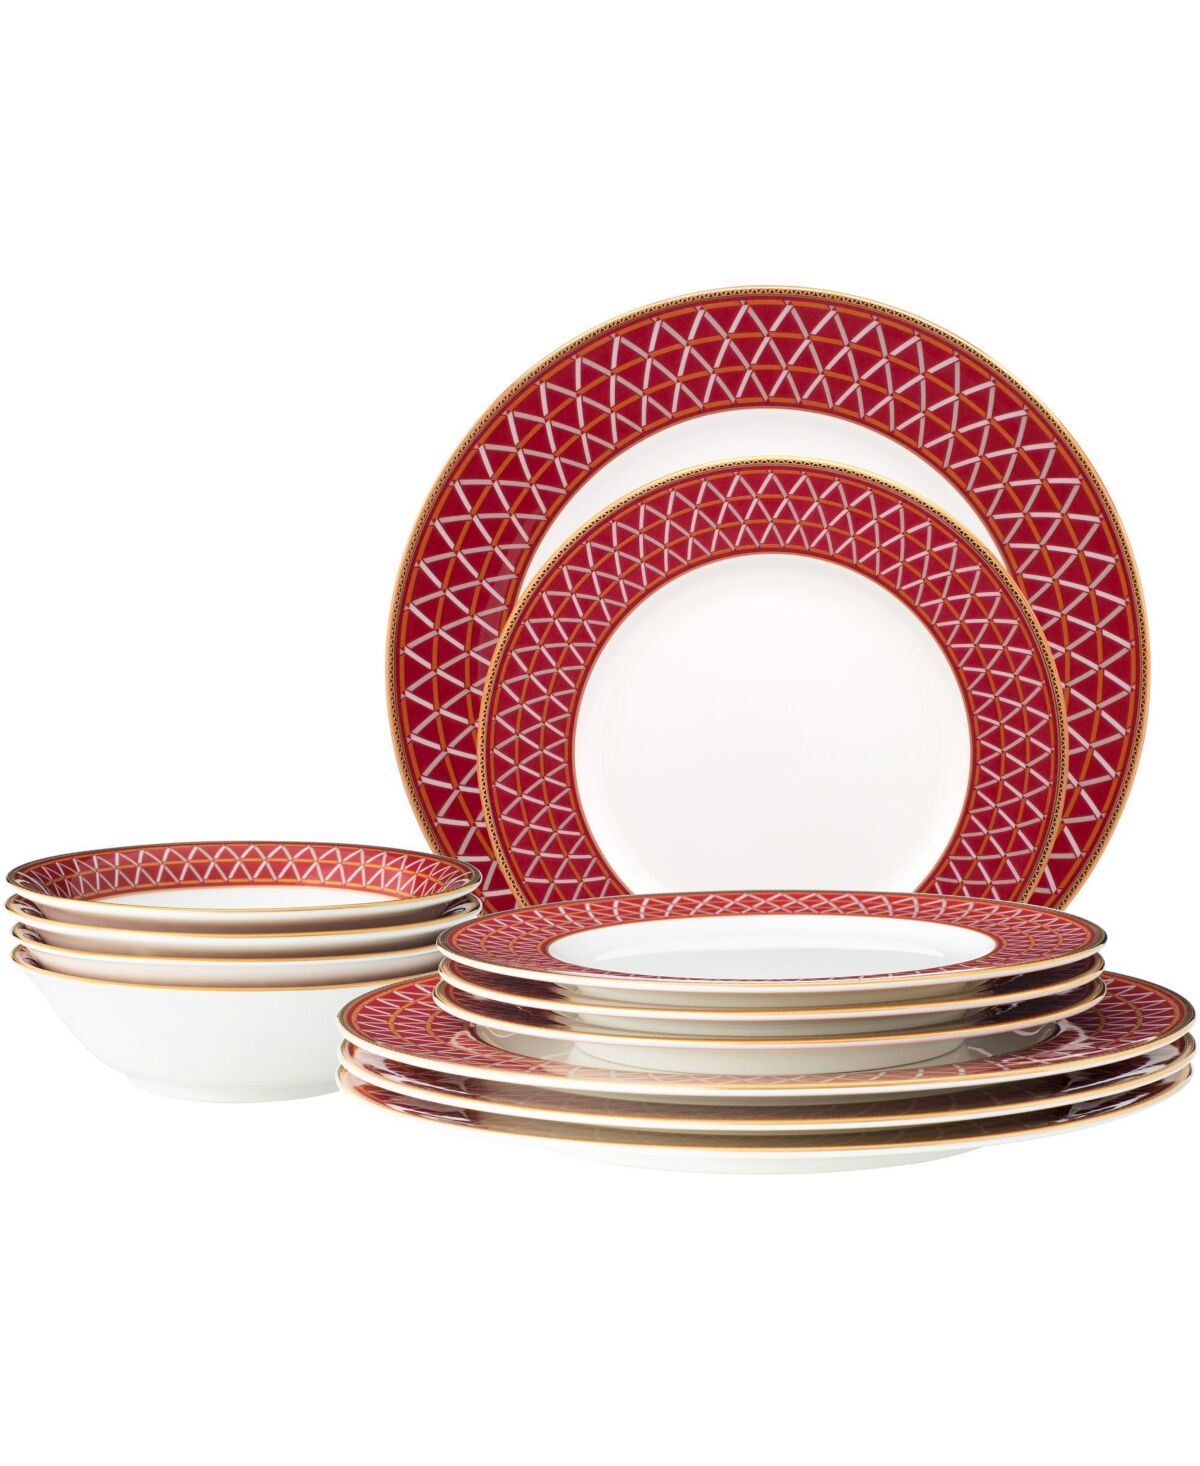 Noritake Crochet 12- Pc Dinnerware Set, Service for 4 - Deep Red And Gold